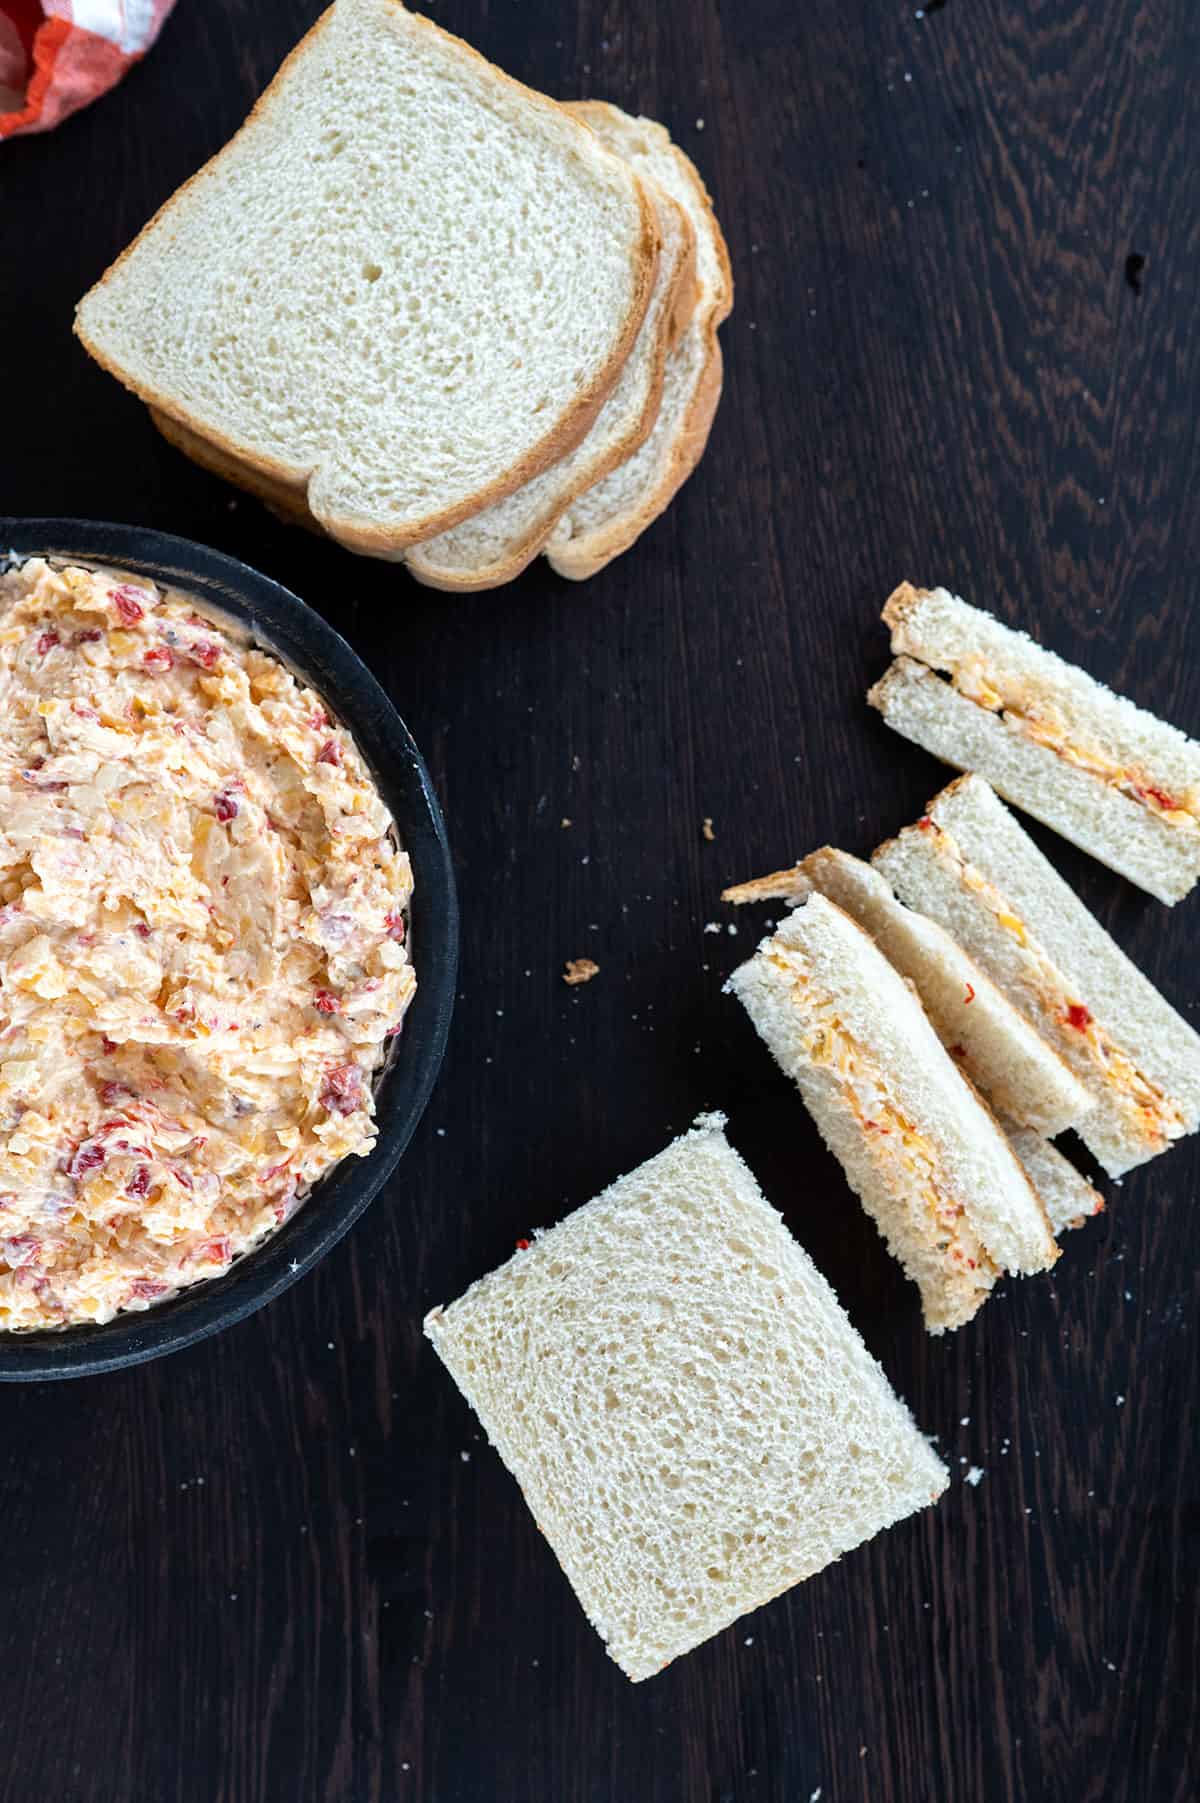 All crusts removed from pimento cheese sandwich.